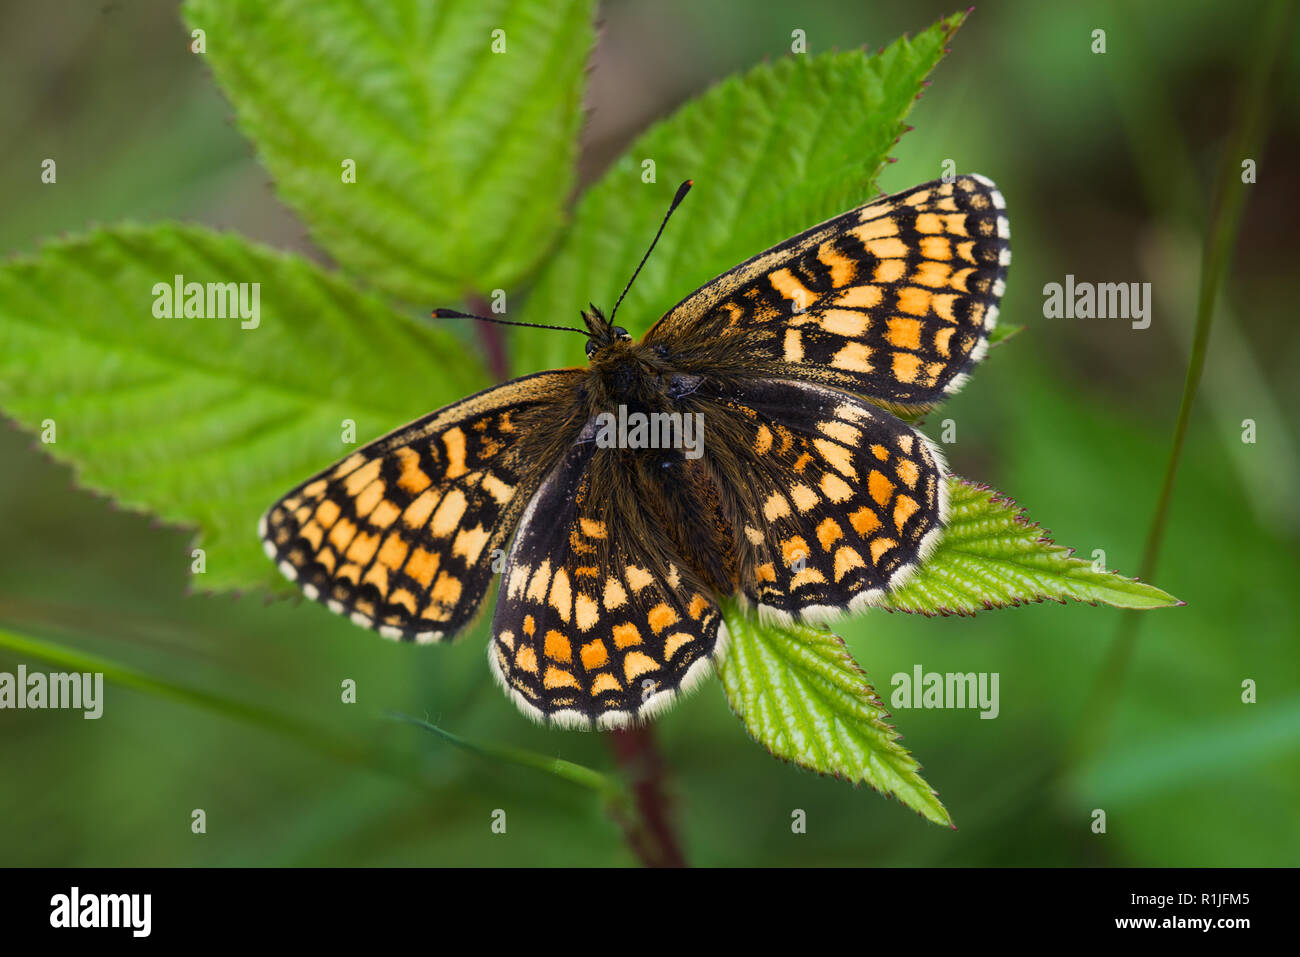 heath fritillary butterfly at rest with wings open, Luckett, Cornwall, UK Stock Photo